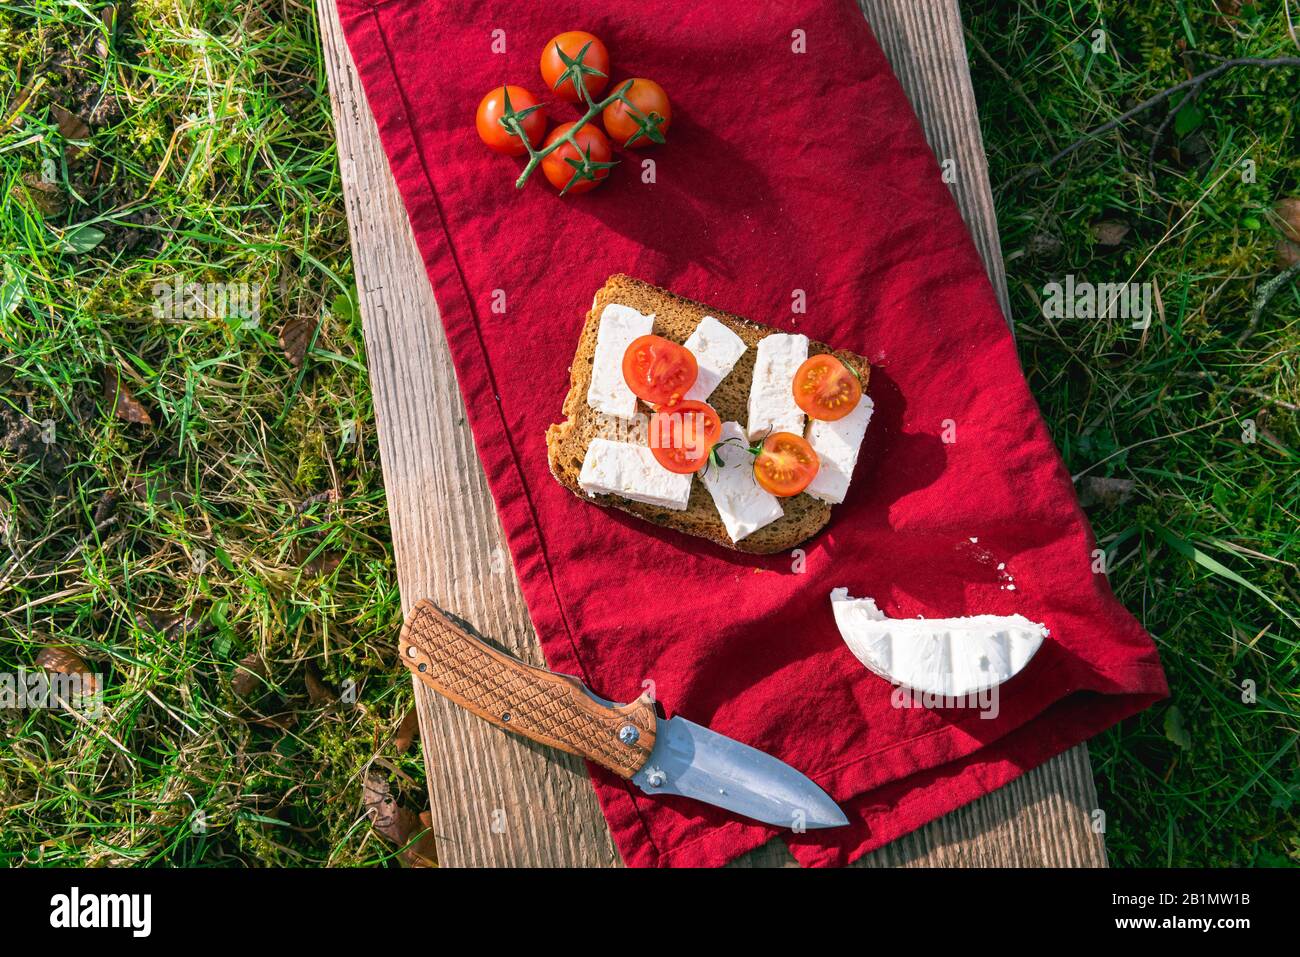 Tomatoes and cheese sandwich on red towel, outdoor, on green grass. Picnic on wood plank in sunlight. Eating on hikes. Healthy snack on the grass. Stock Photo